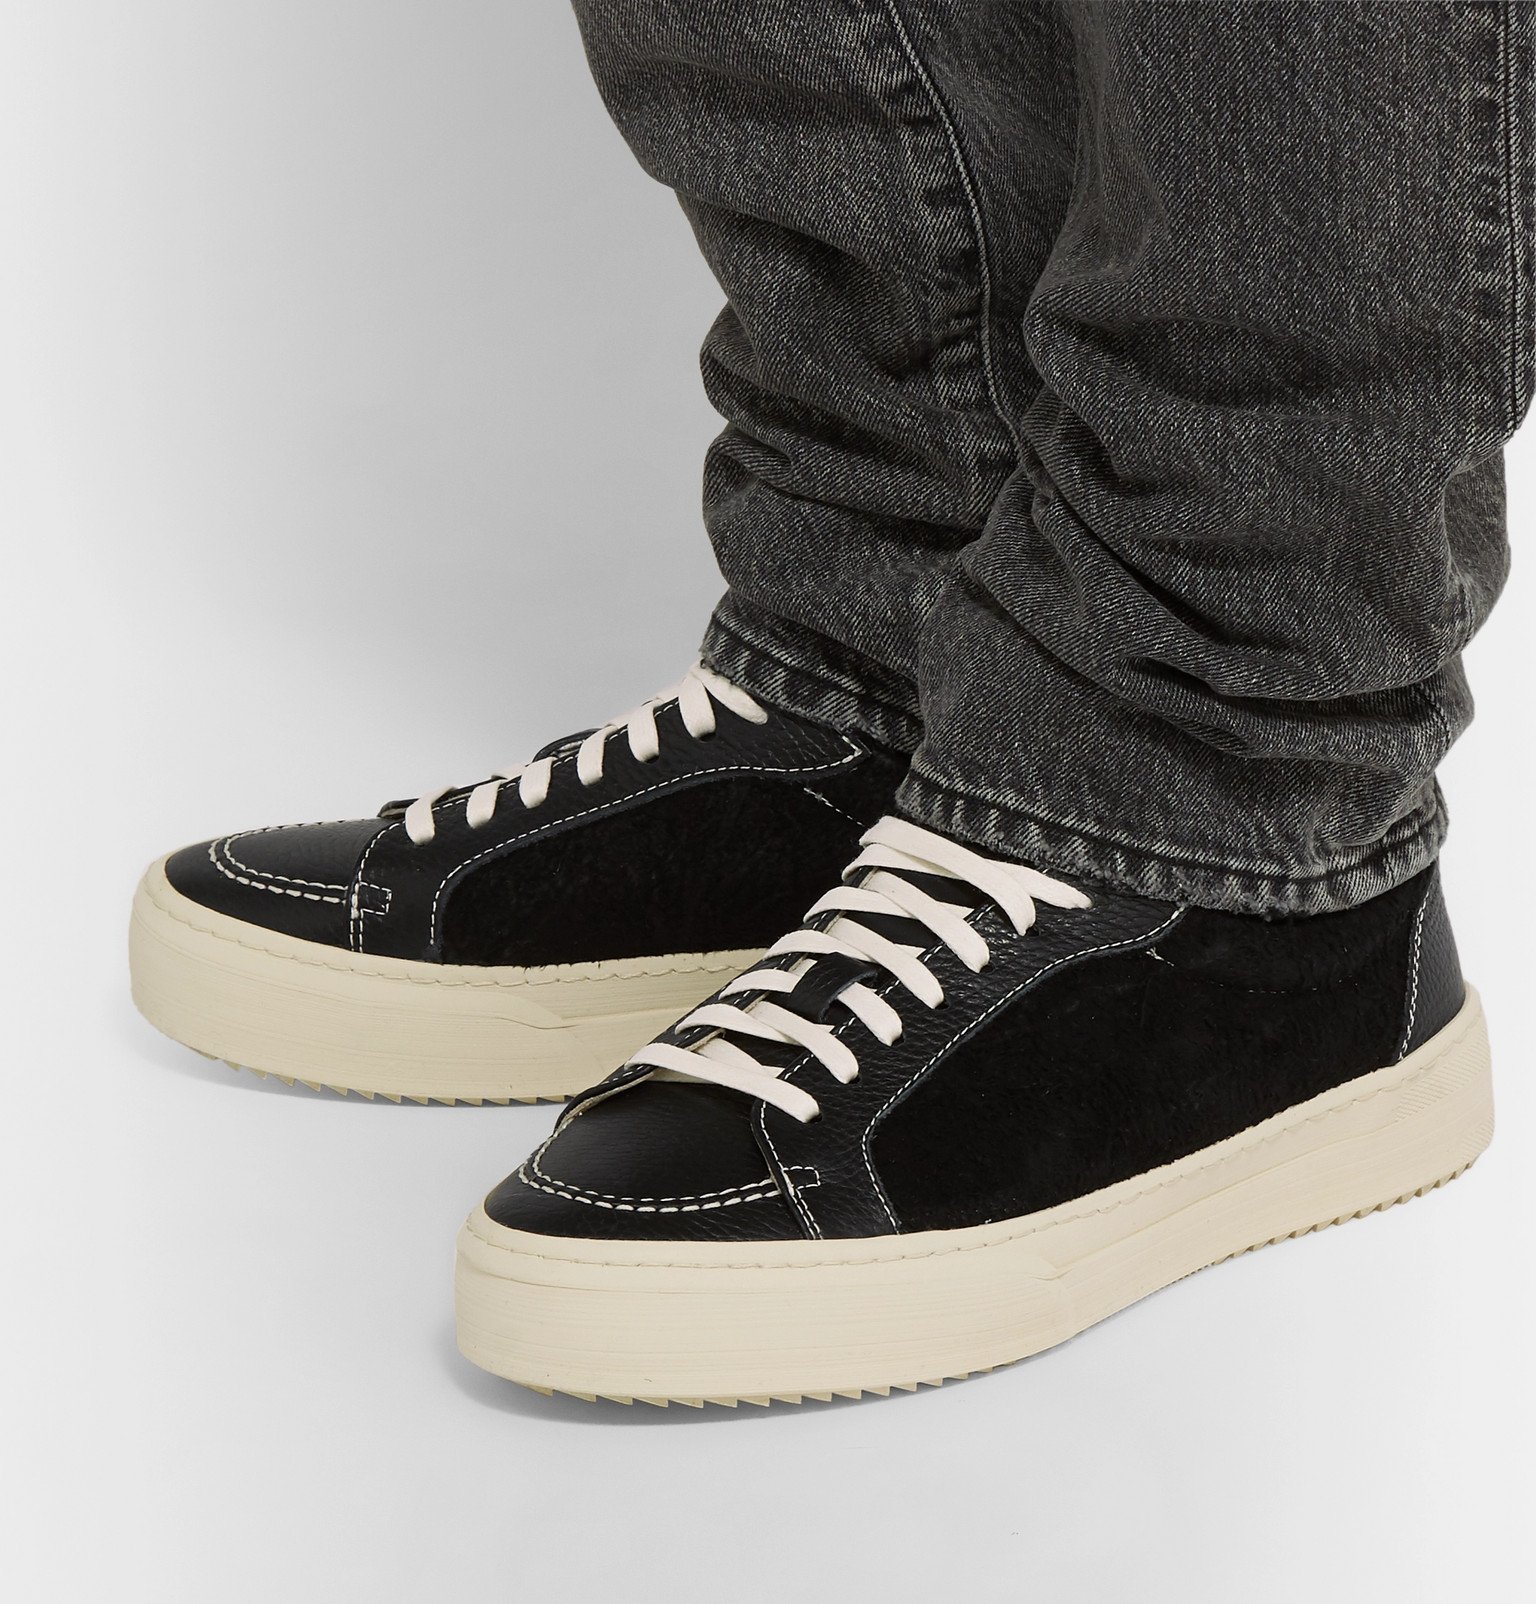 Rhude - V1 Leather and Suede Sneakers - Black Rhude